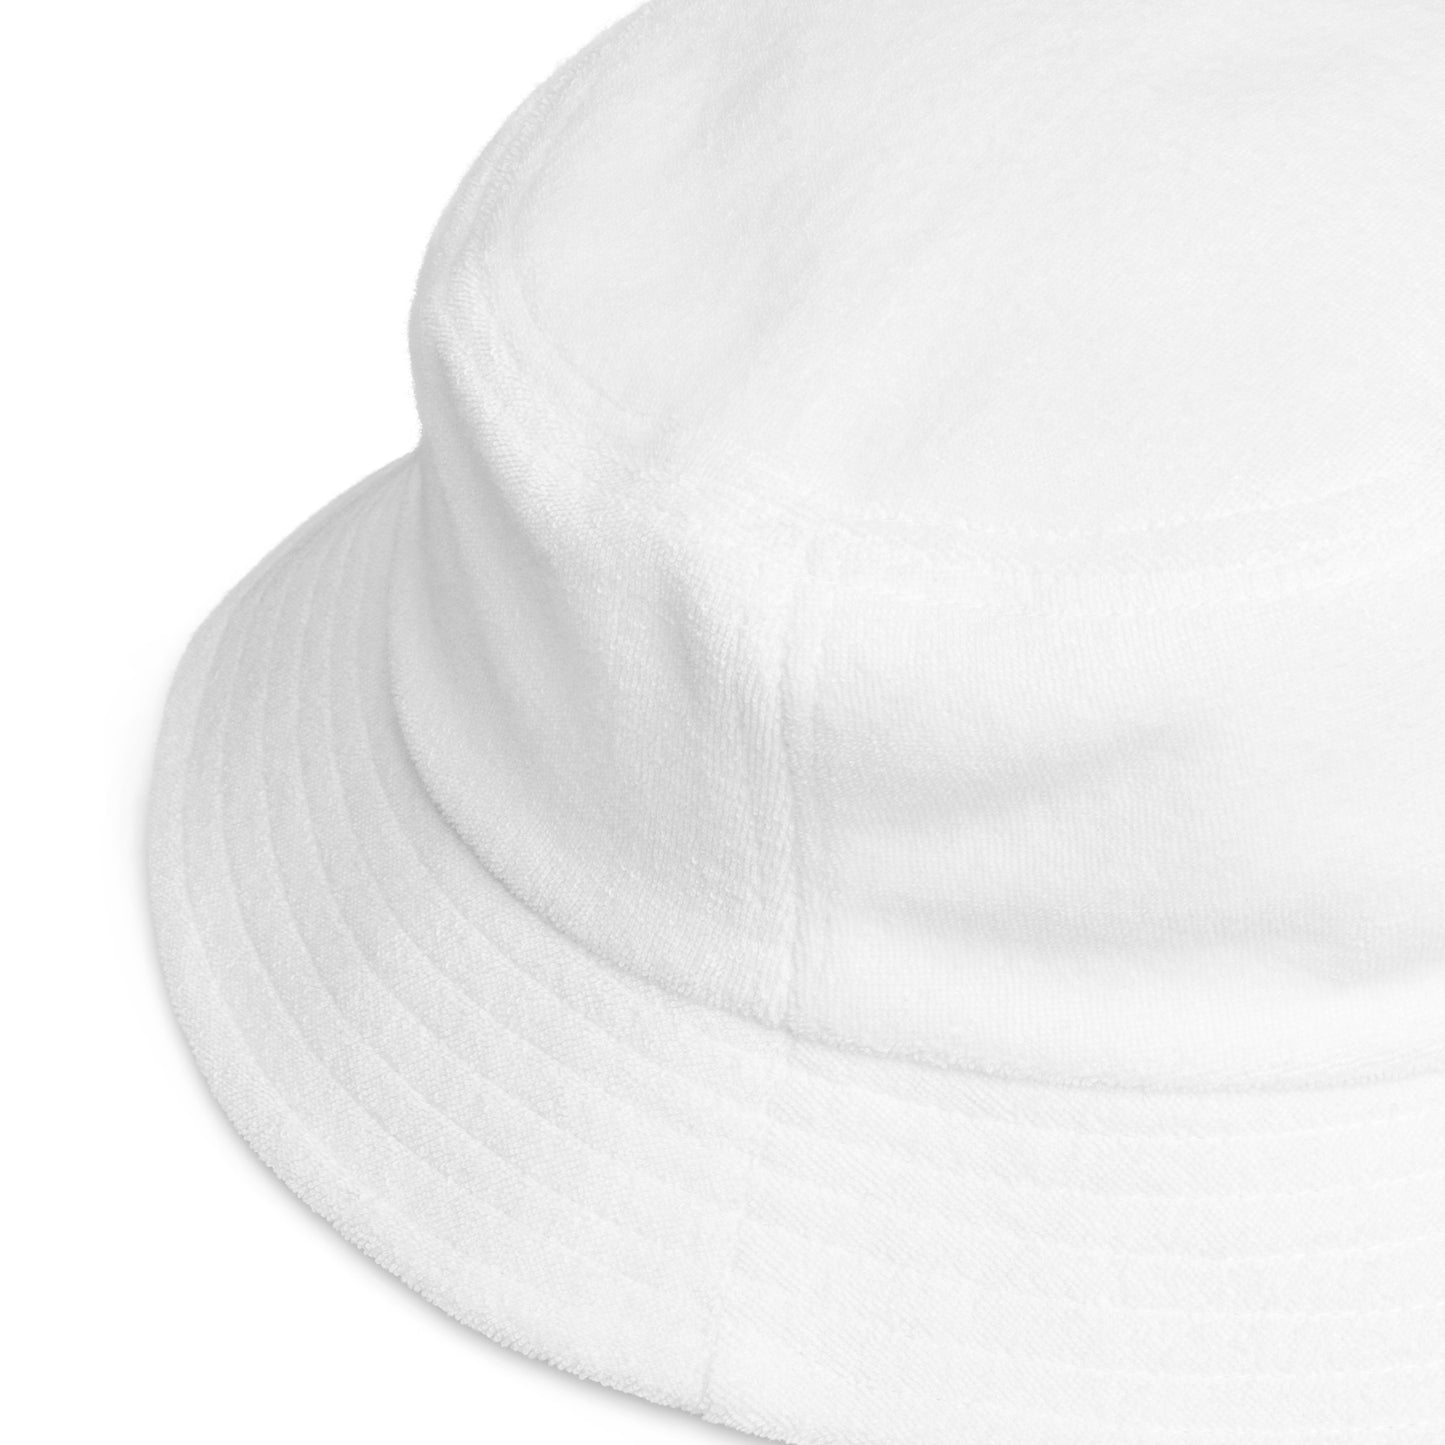 Limited Edition Bucket Hat